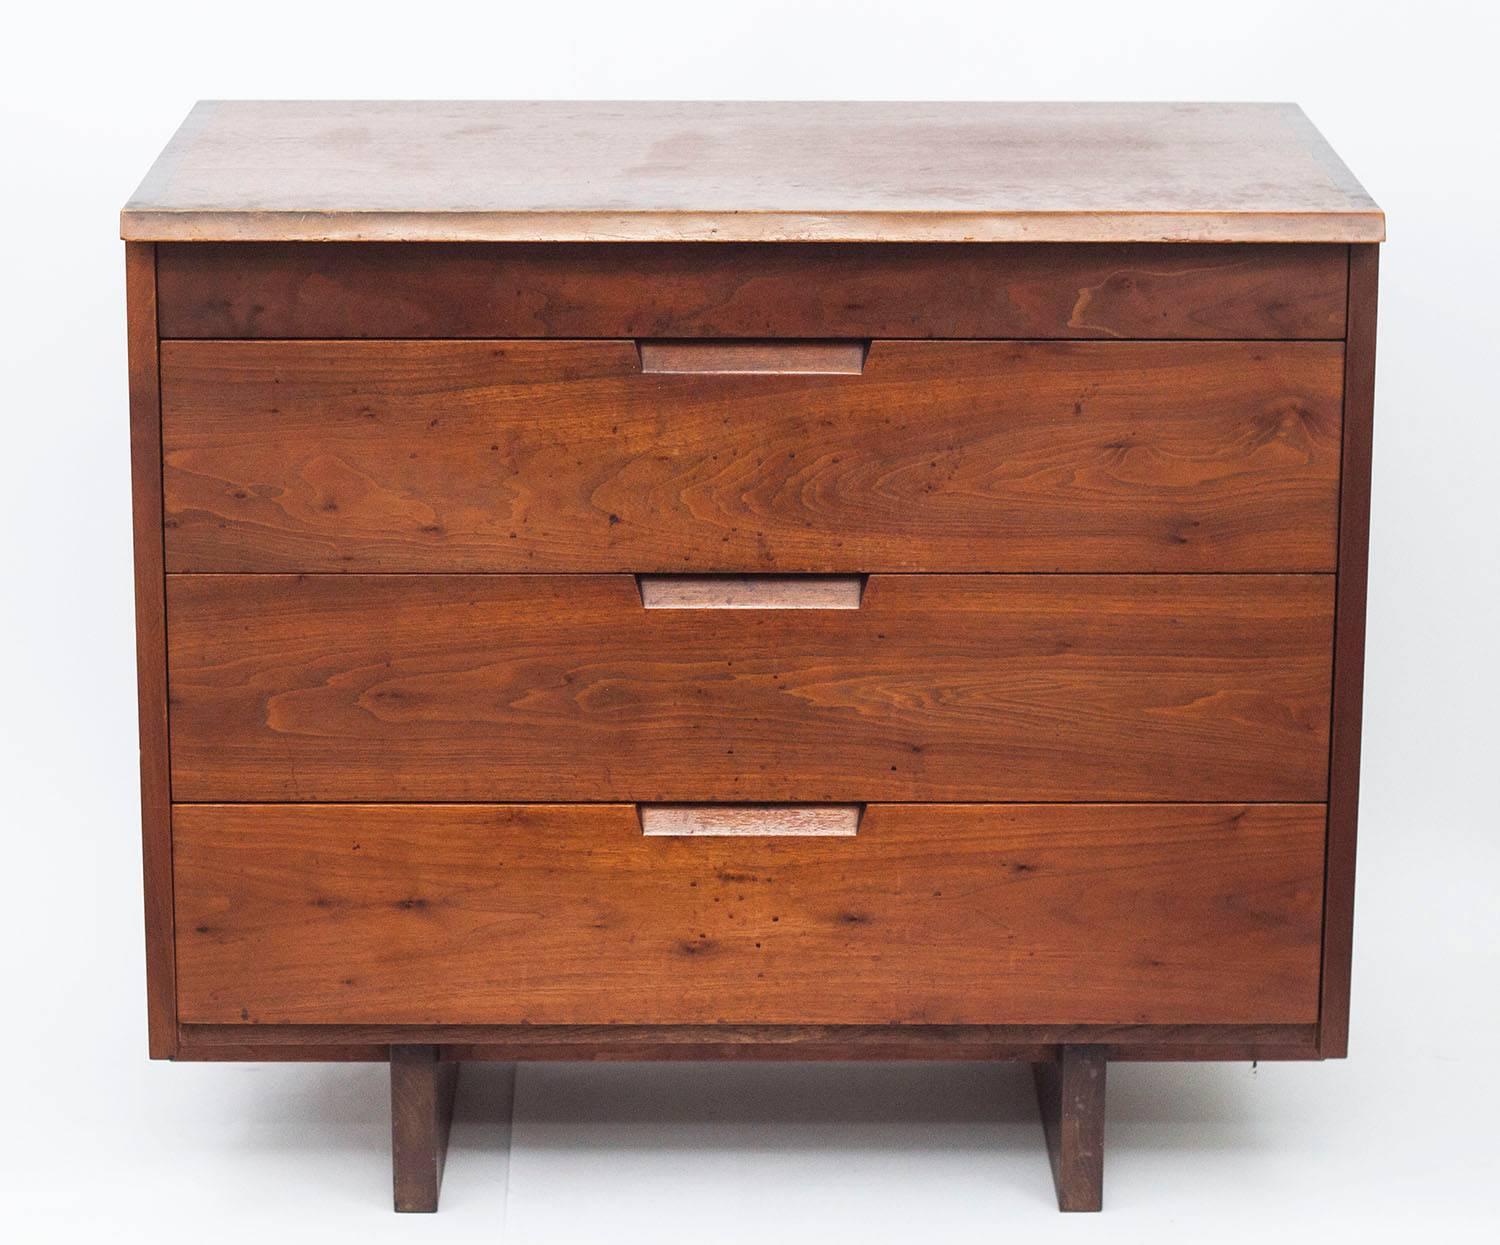 Pair of quintessential Nakashima walnut dressers showing featuring dovetail construction and a natural edge. These dressers were crafted in his historic workshop in New Hope, PA in 1963 and are signed with the client name.

George Nakashima